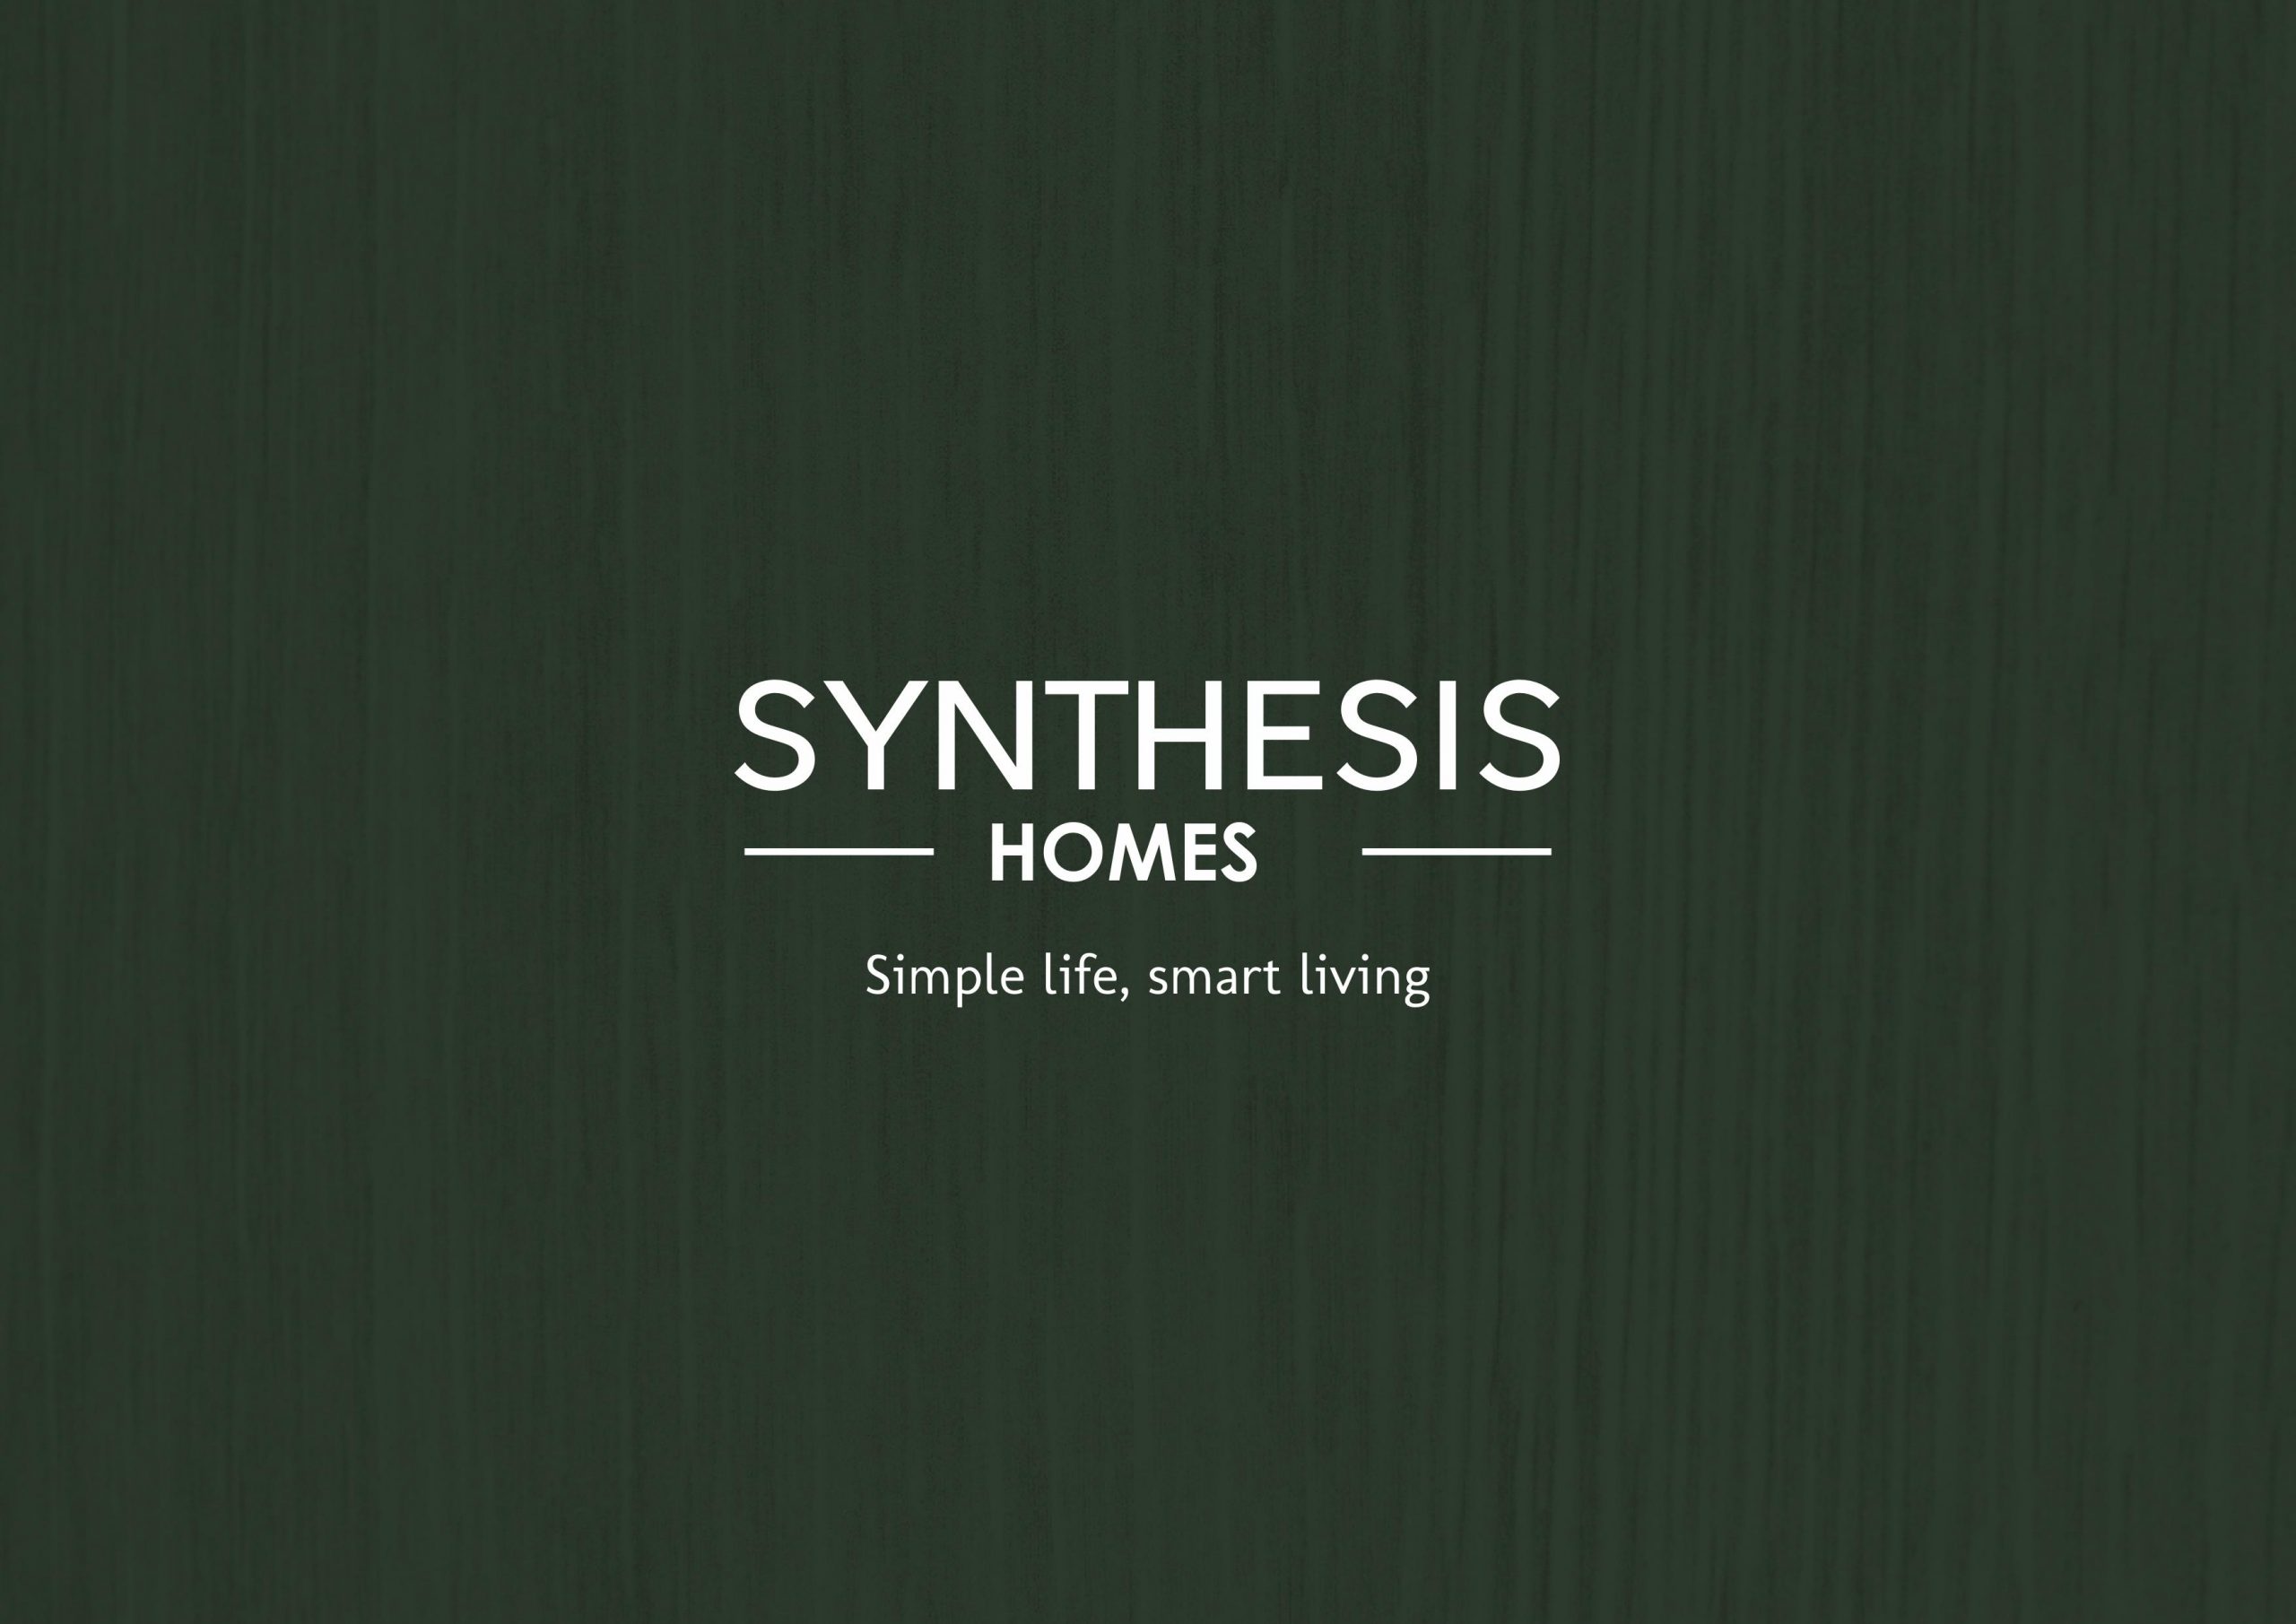 SYNTHESIS HOMES IMAGE